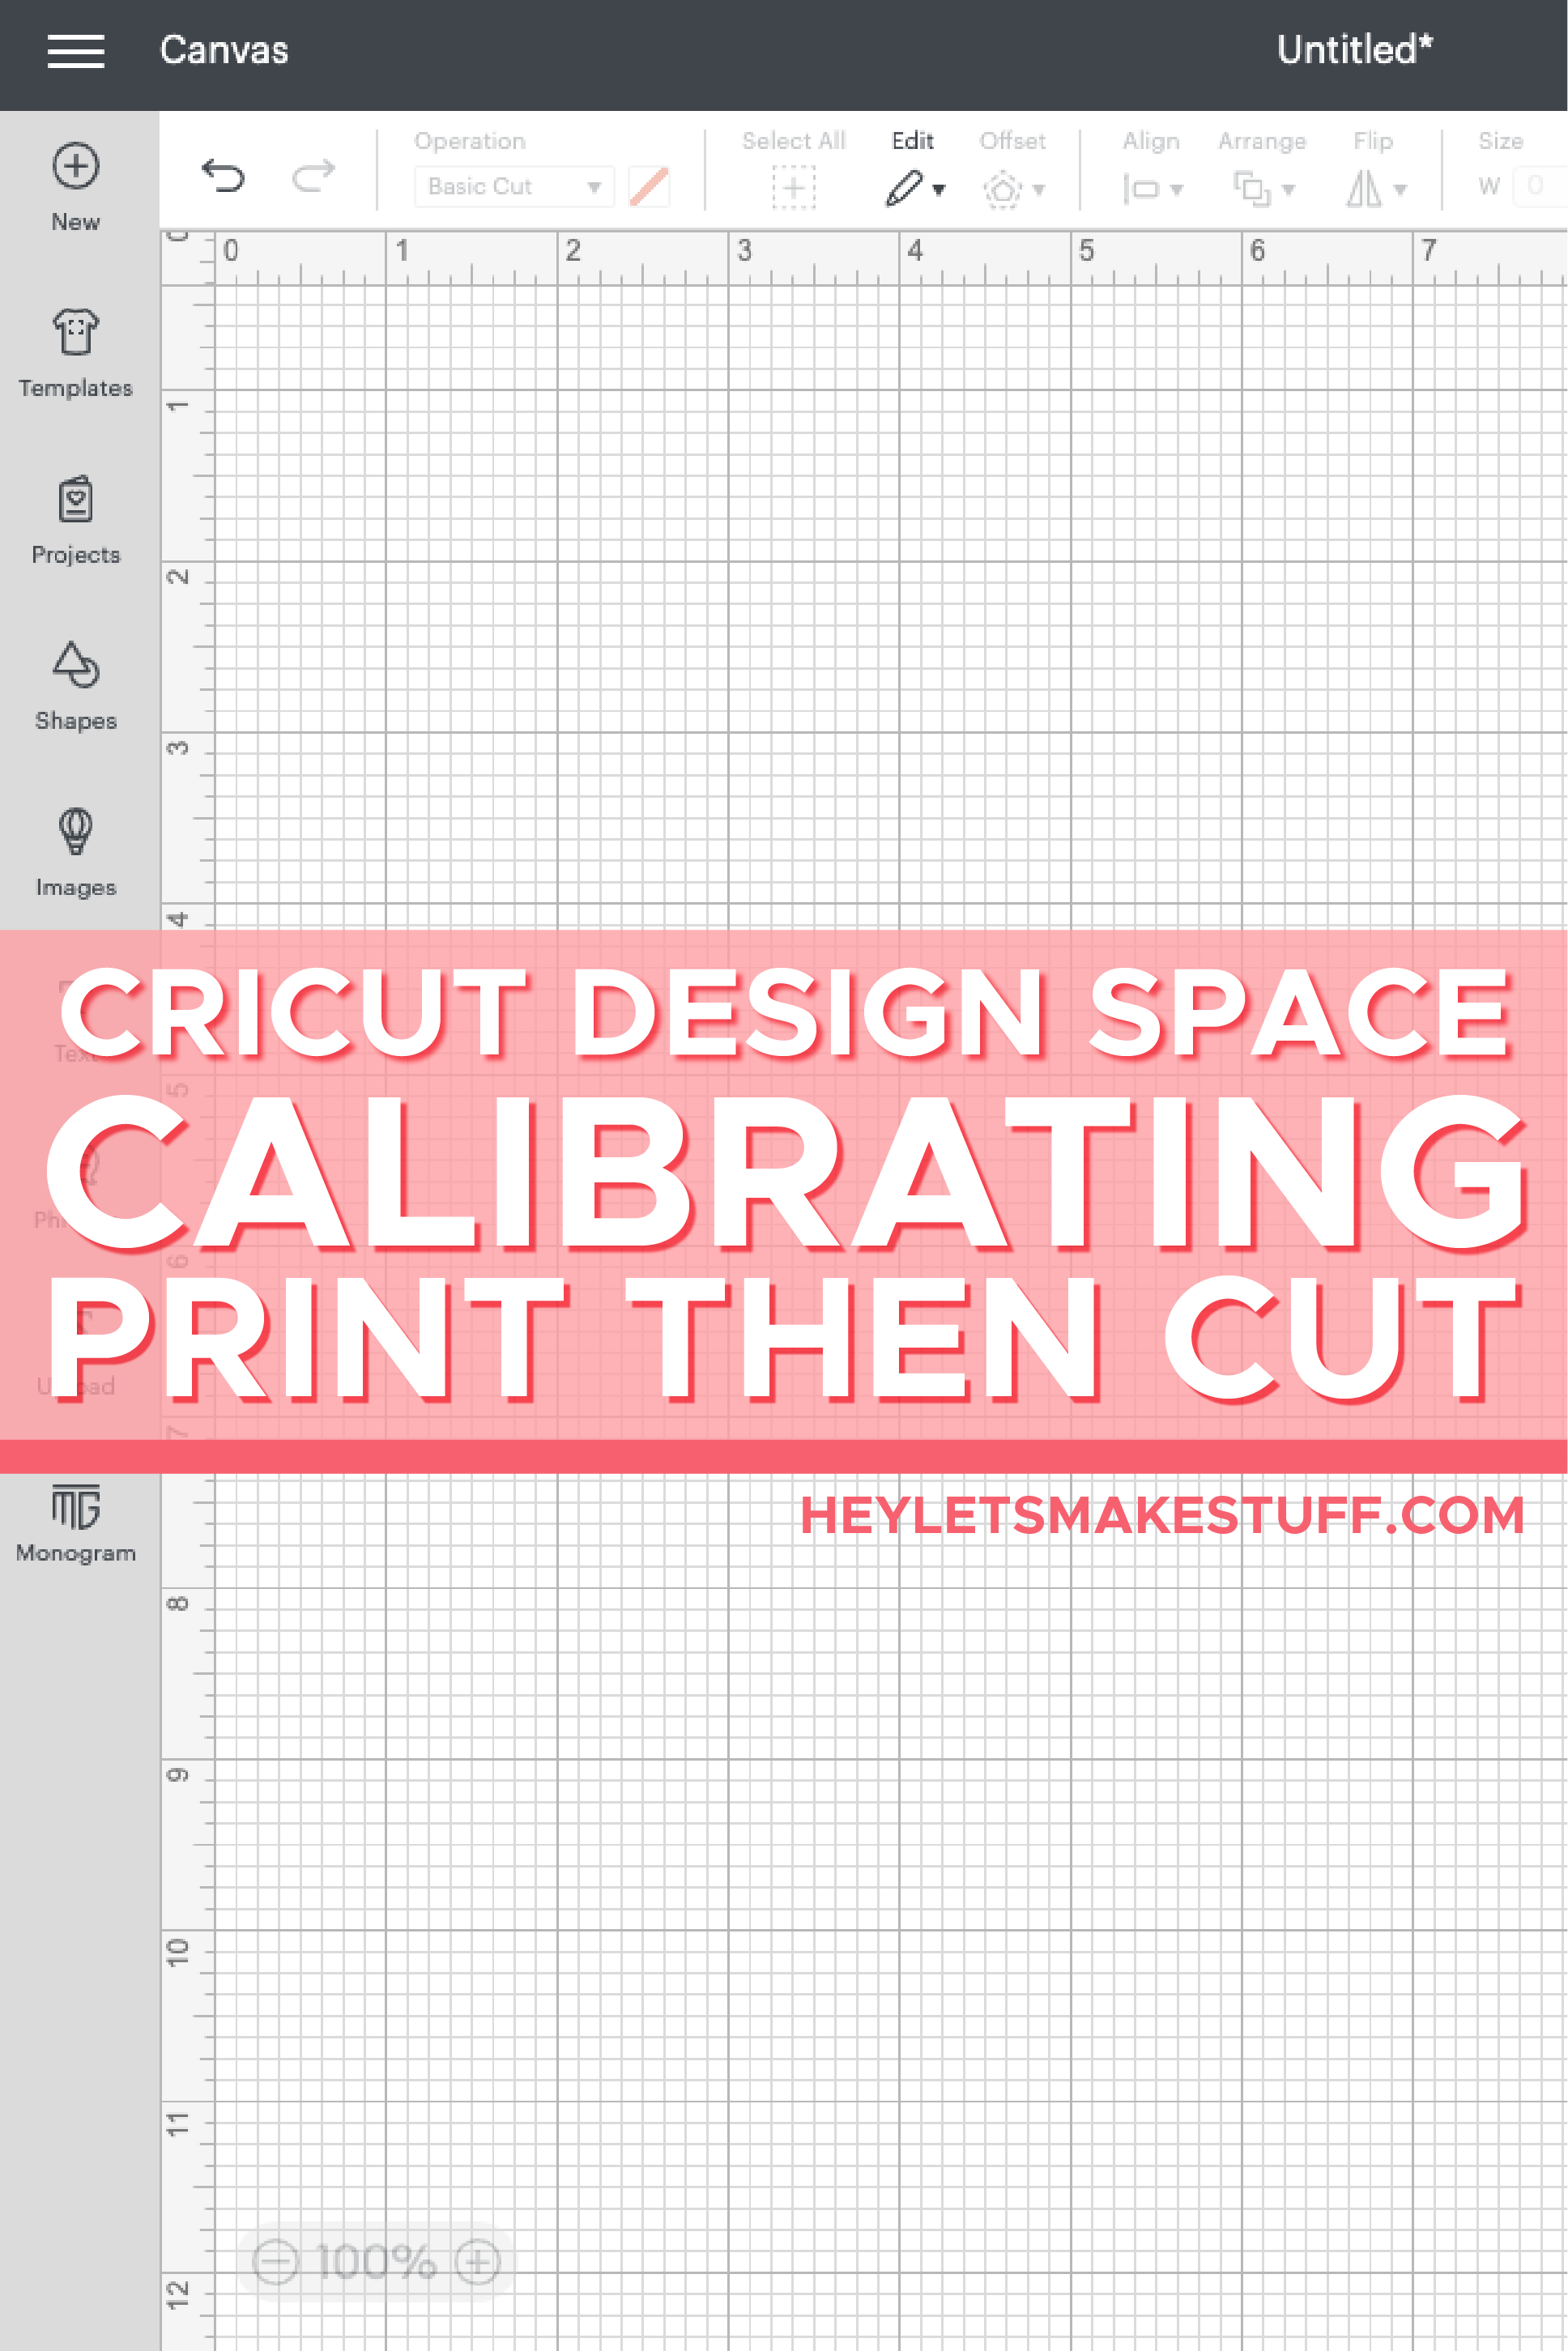 The Best Printers For Cricut Print Then Cut Projects - Amy Makes That